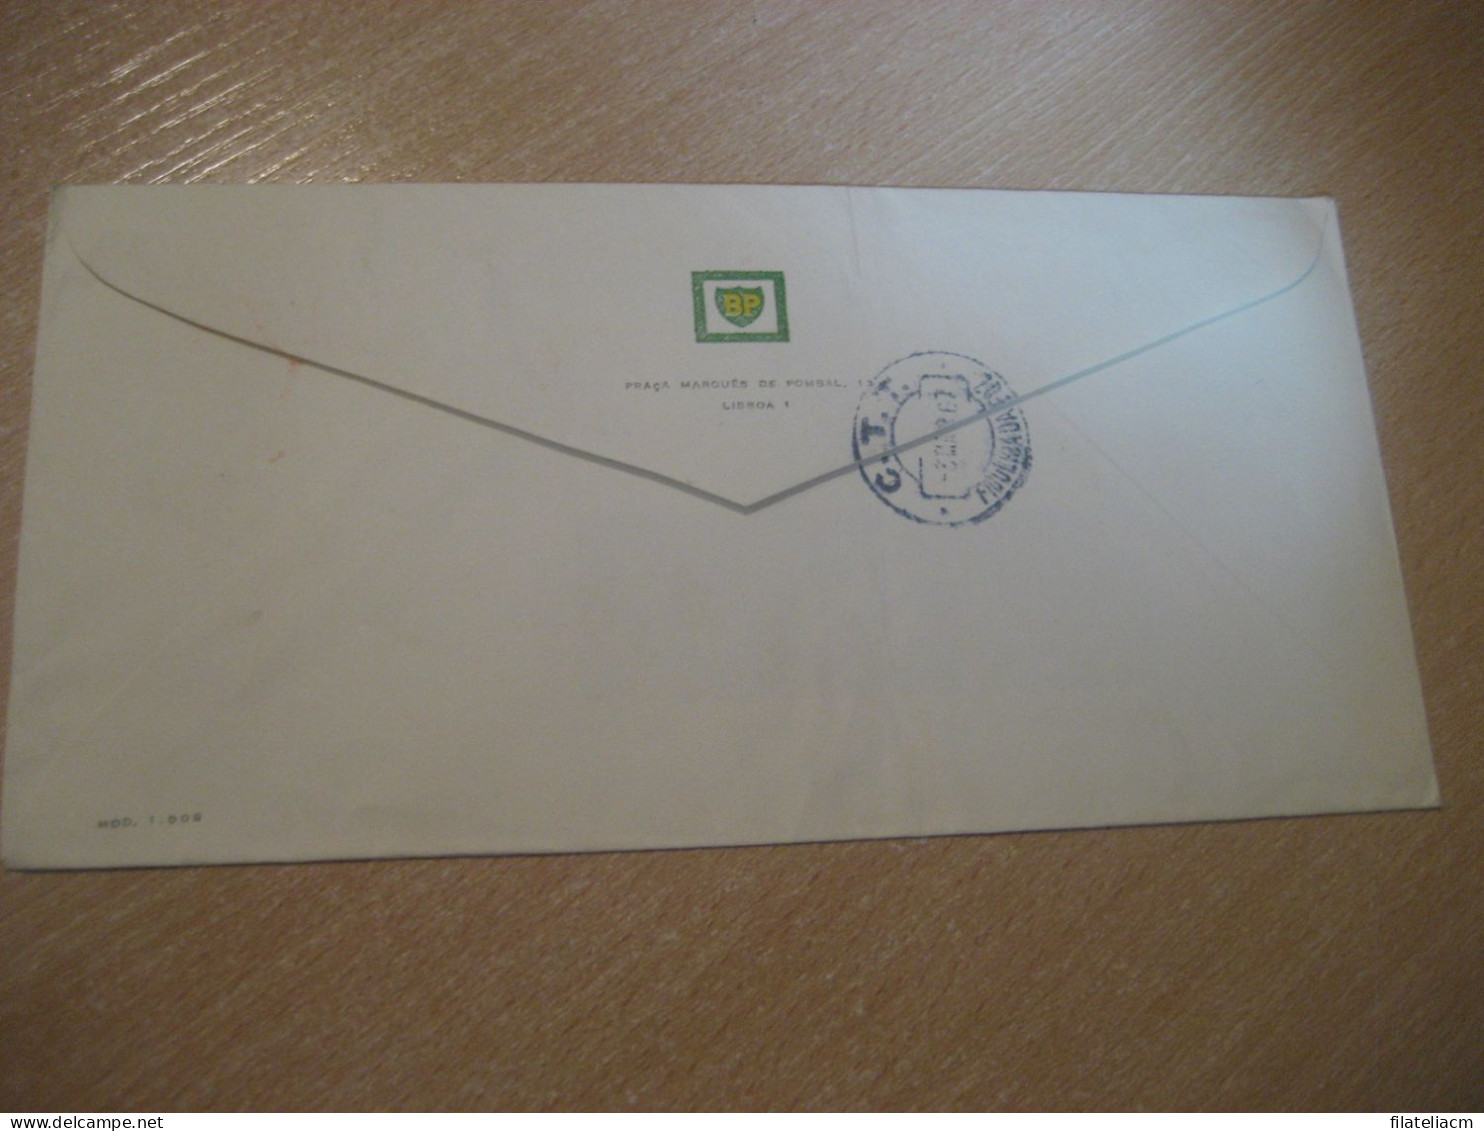 LISBOA 1967 BP Gas Oil Registered Meter Mail Cancel Cover PORTUGAL - Covers & Documents